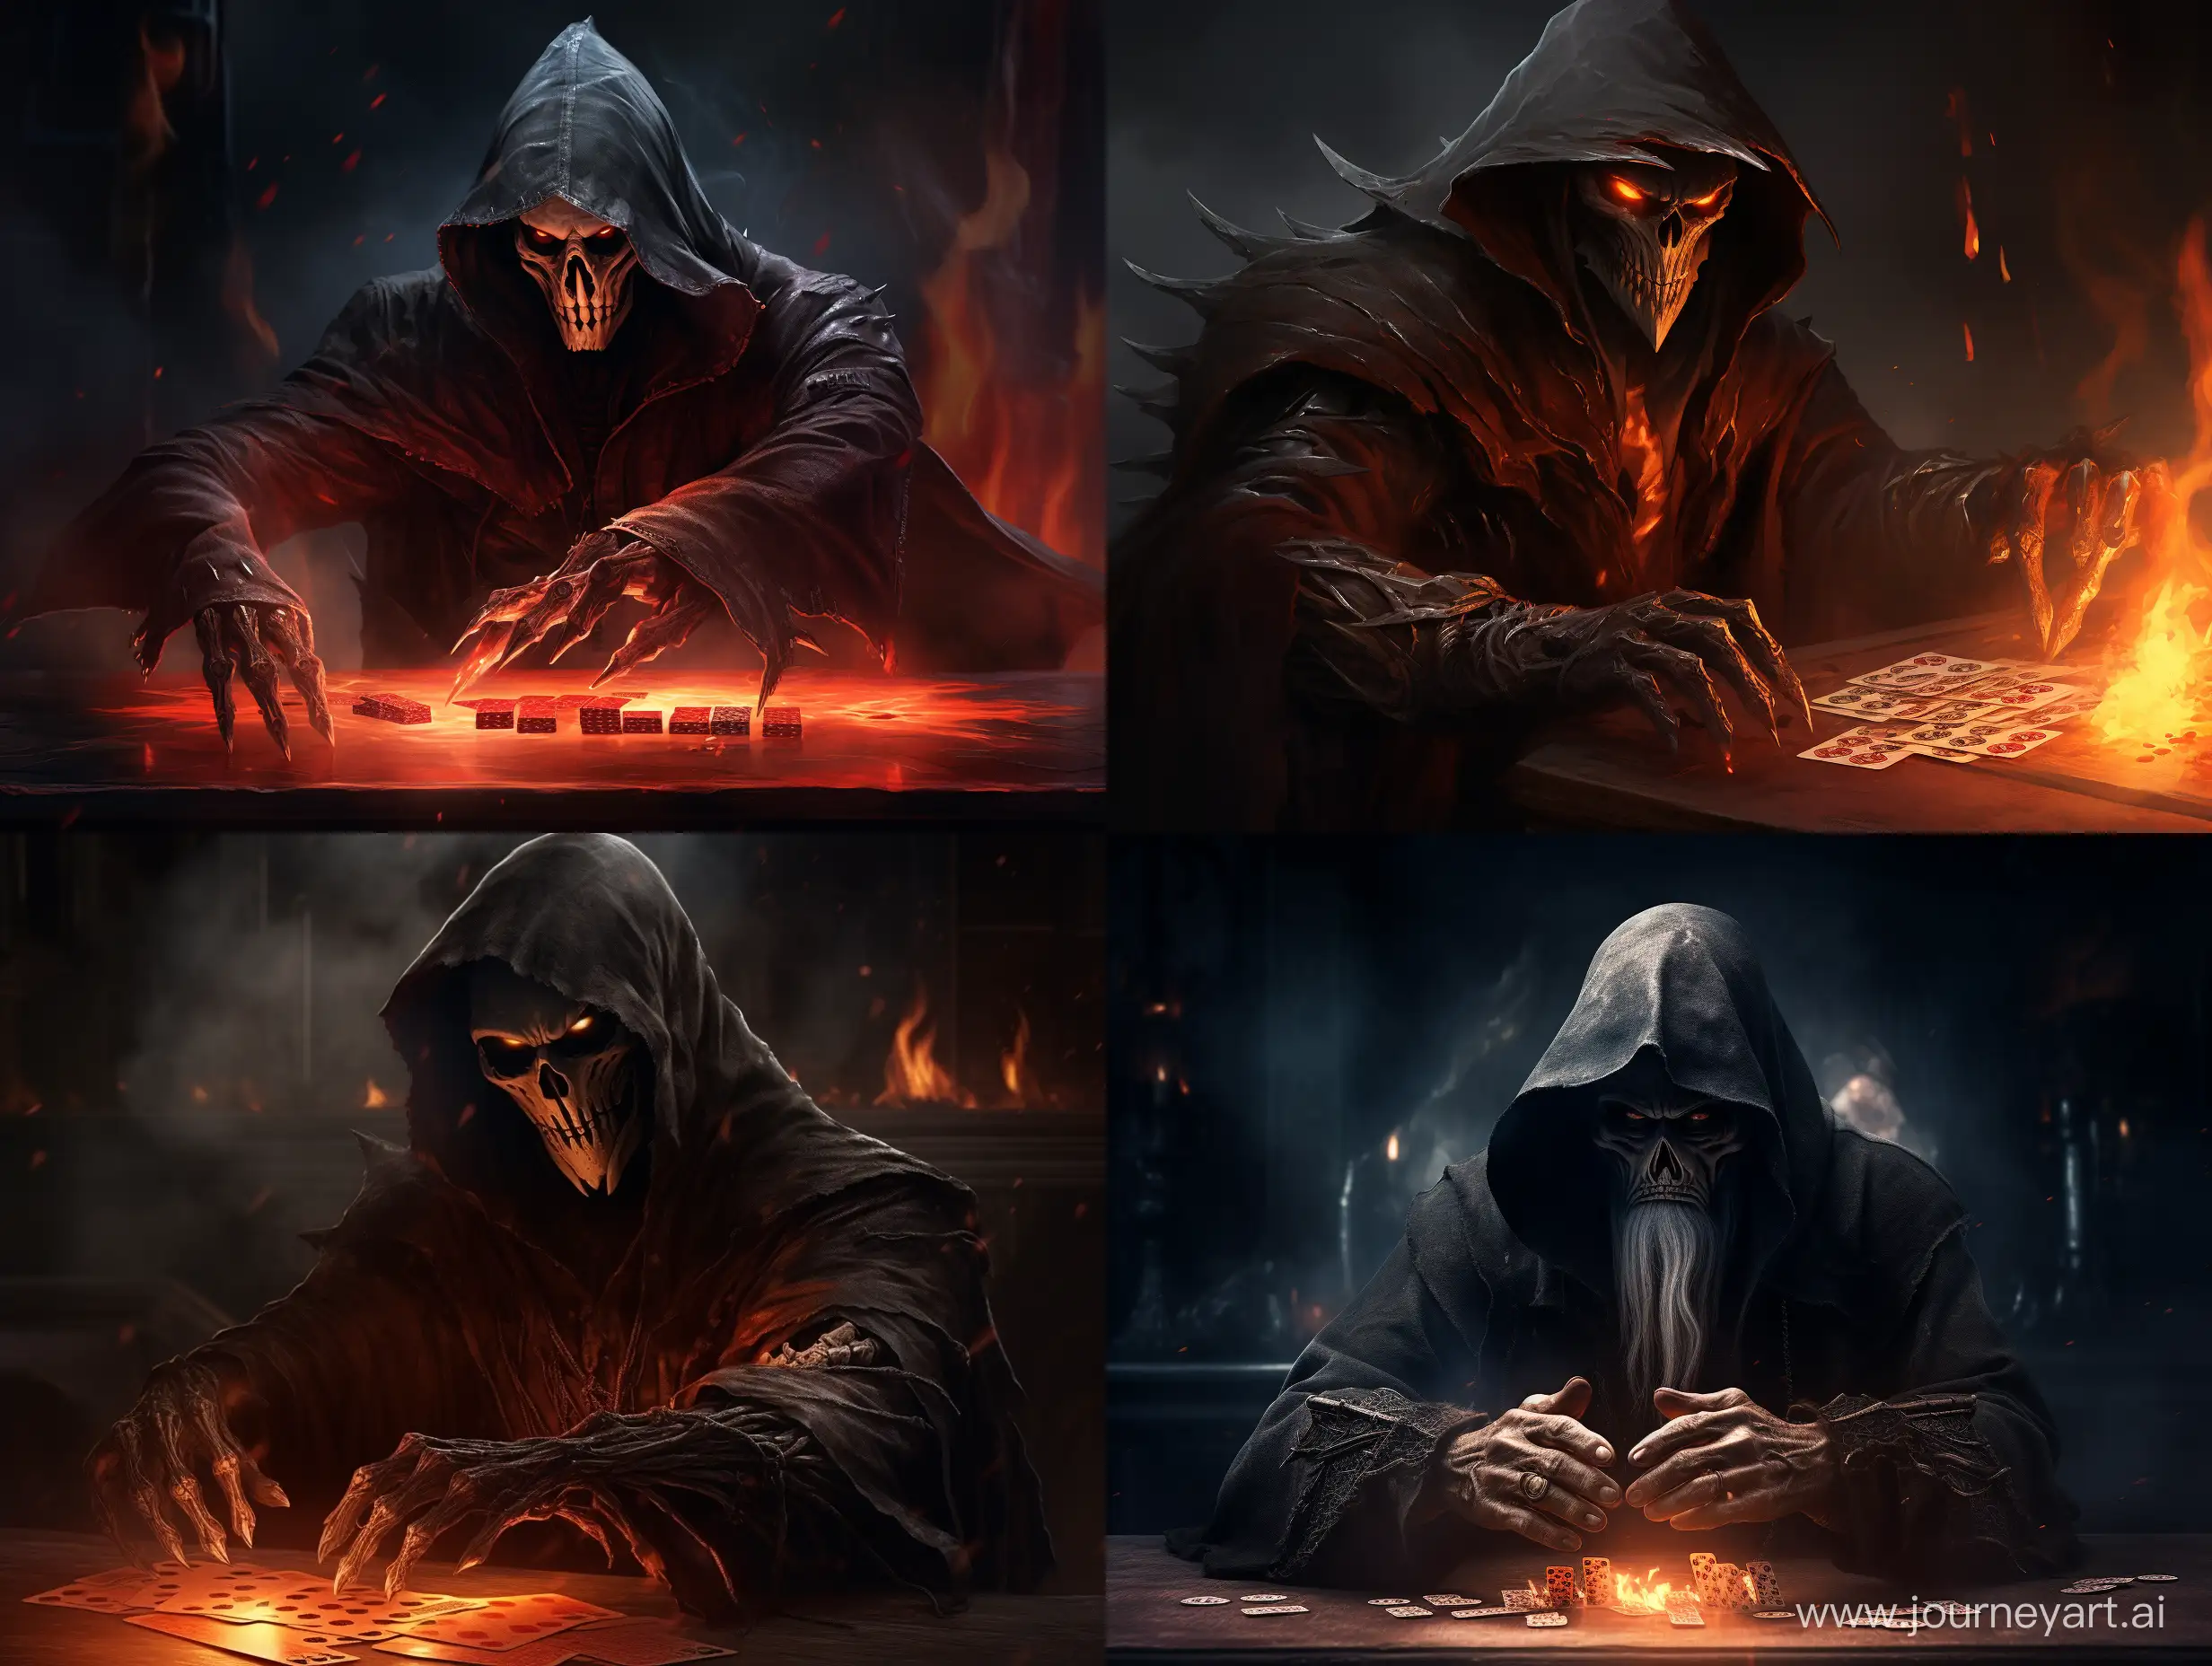 Grim-Reaper-Engages-in-Intense-Texas-Holdem-Poker-with-Flaming-Aces